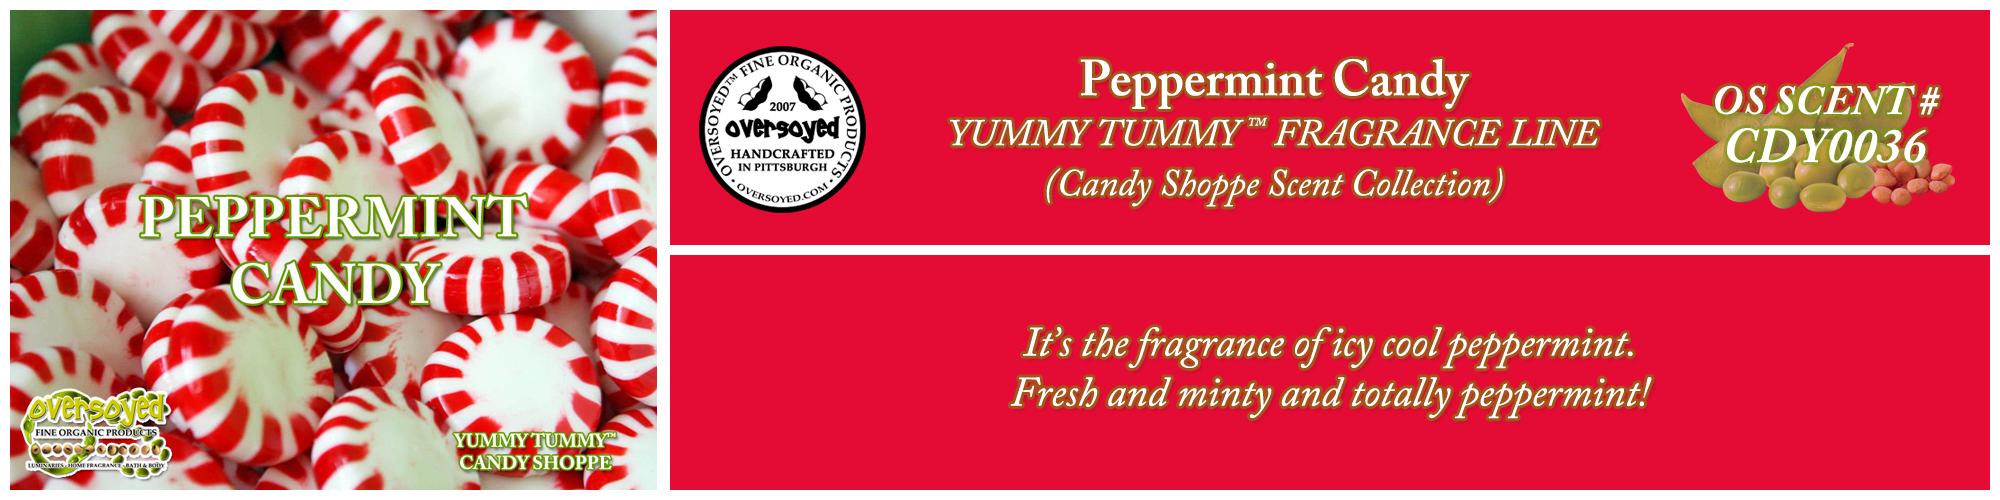 Peppermint Candy Handcrafted Products Collection